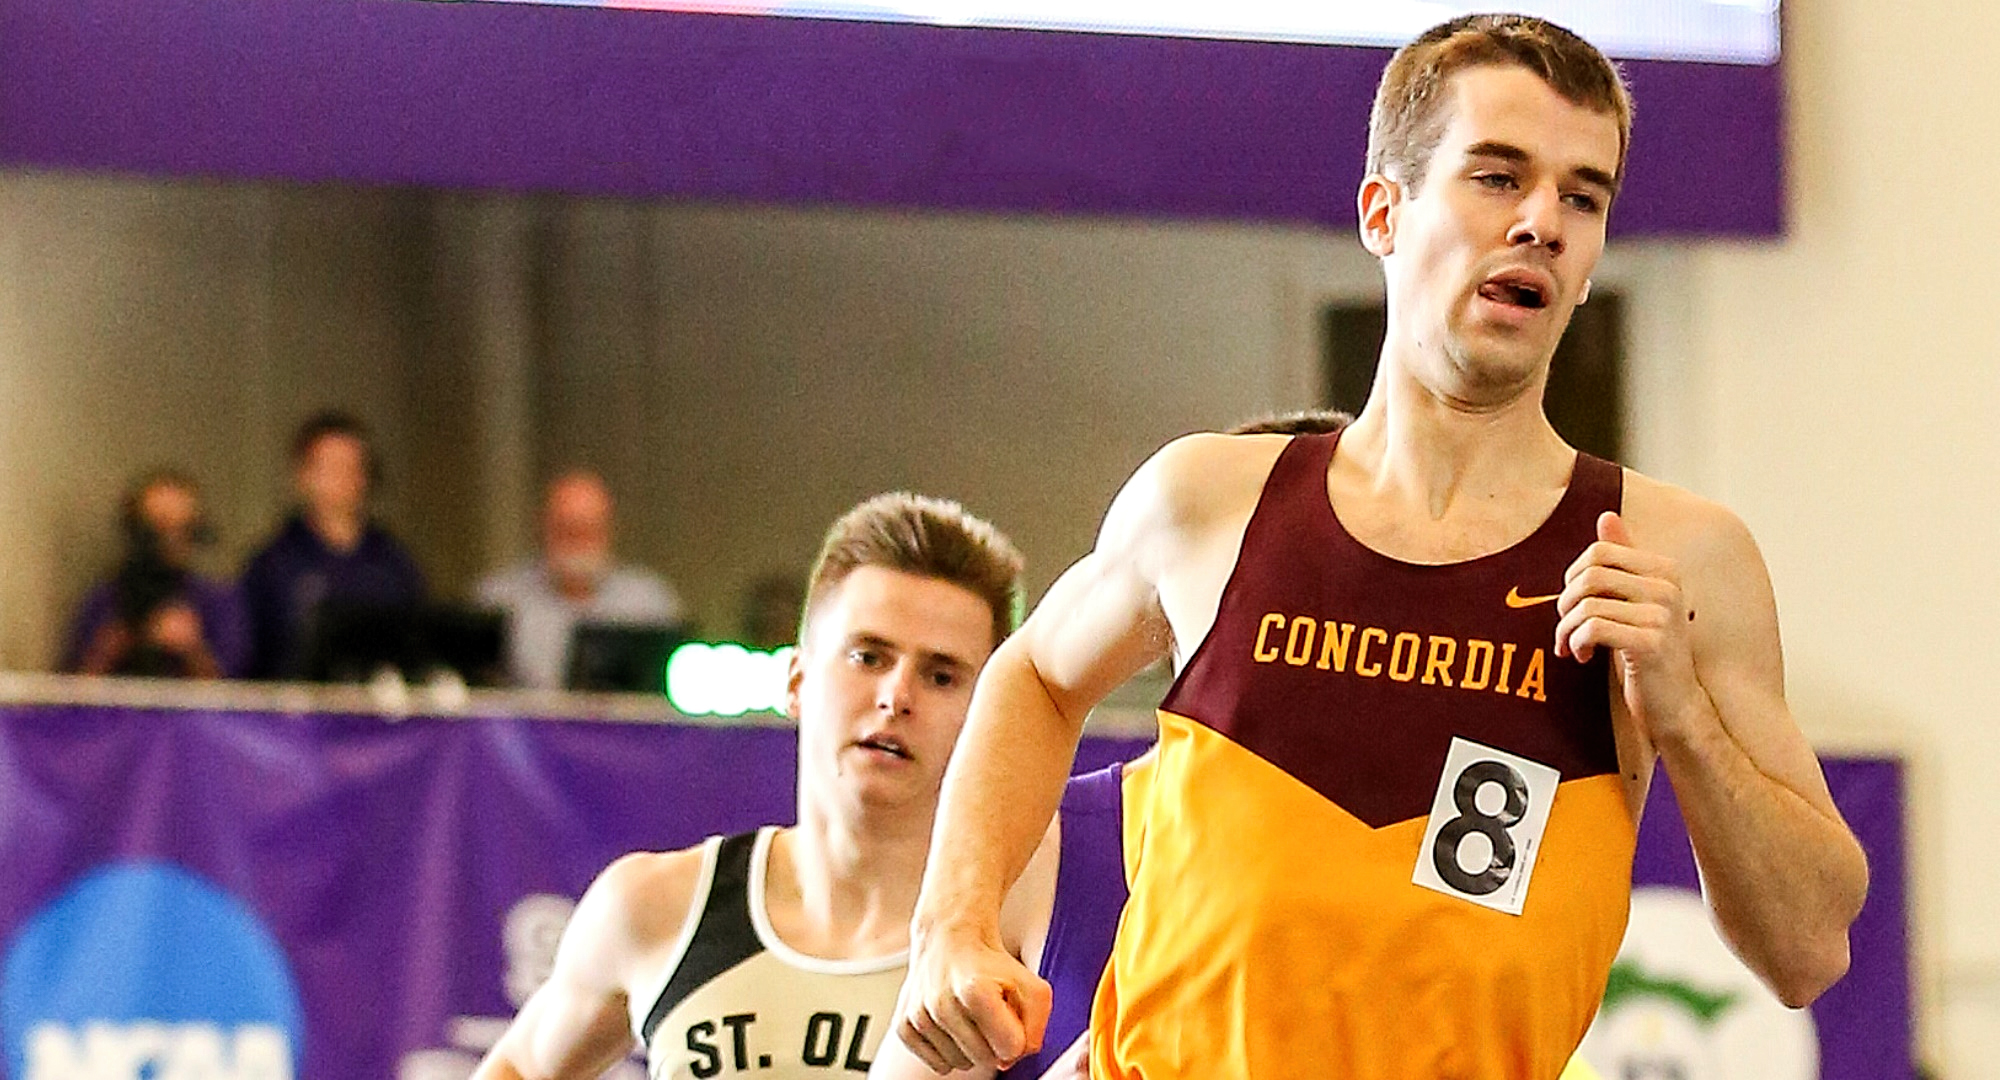 Senior Matthew Lillehaugen was one of four Cobber indoor MIAC award winners to post Top 10 finishes at the Hamline Invite. (Photo courtesy of Nathan Lodermeier)